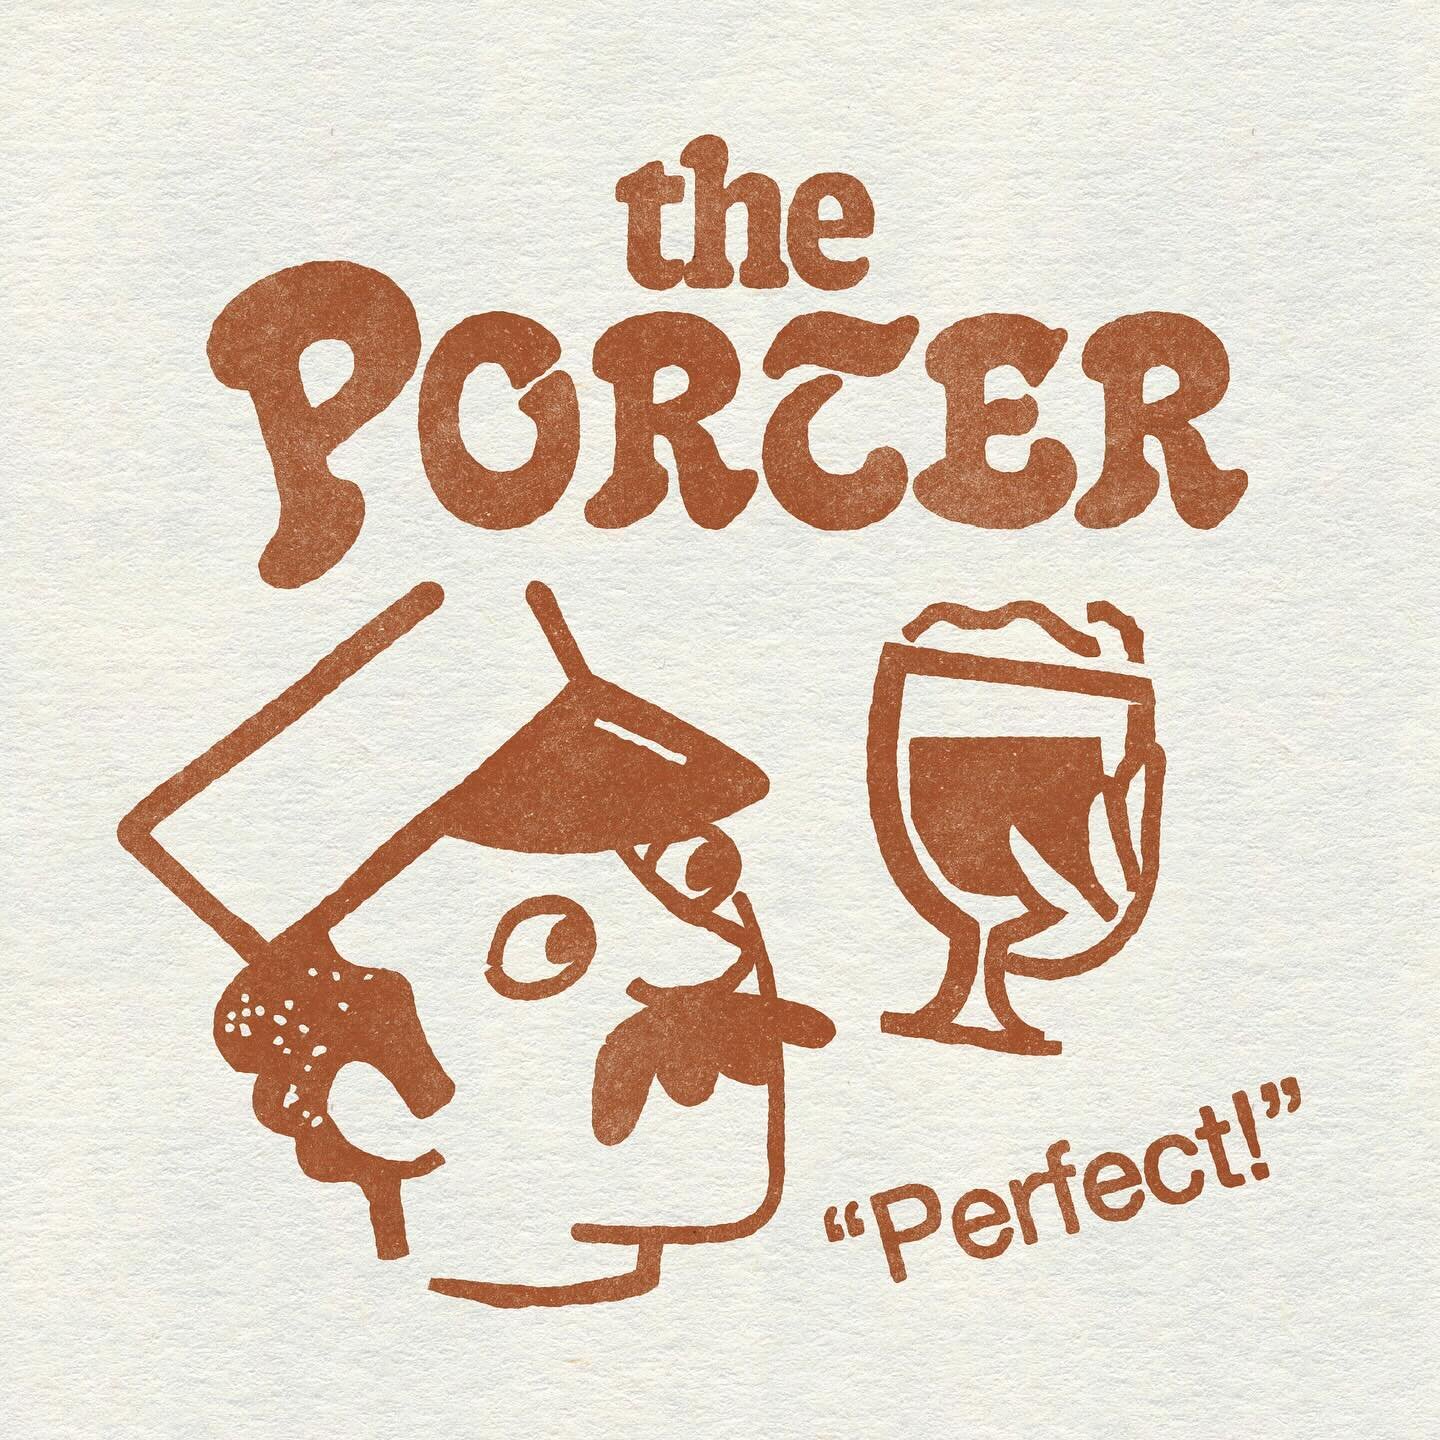 So close you can almost taste it 
&bull;
Follow @theporterbeerbar for details on their imminent reopening 🍻